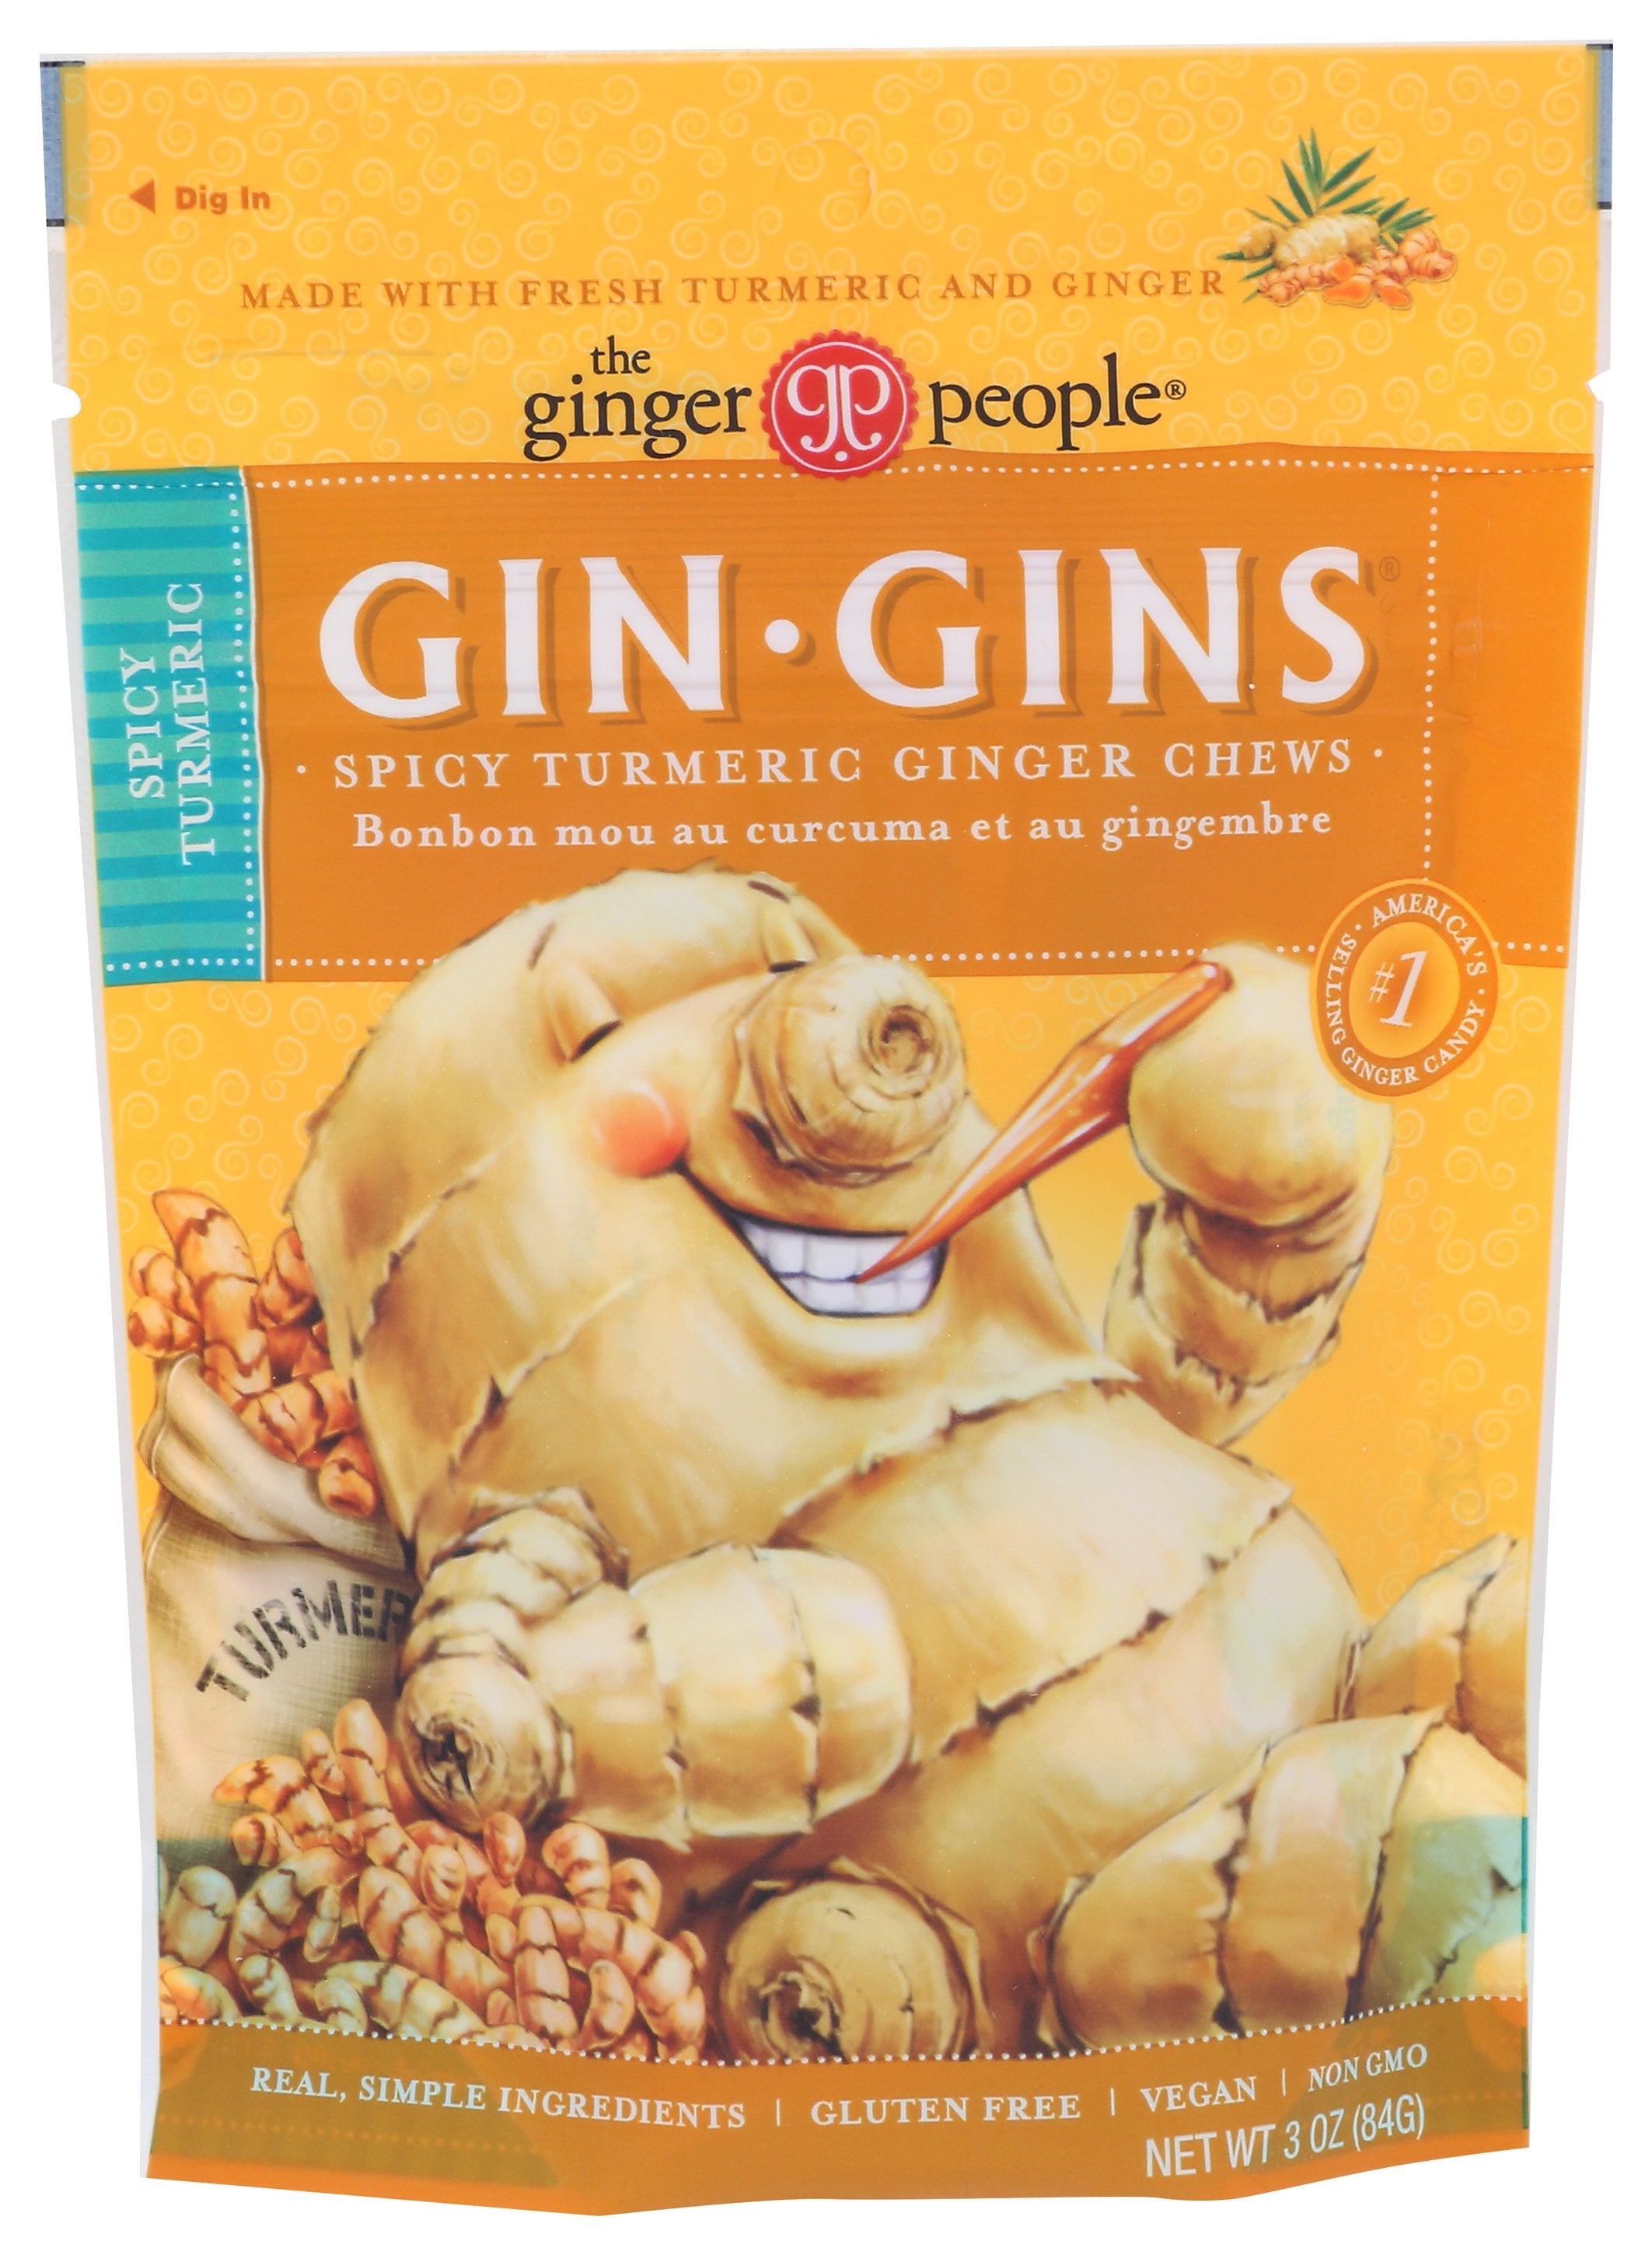 GINGER PEOPLE GINGER CHEW SPCY TURMERIC - Case of 12